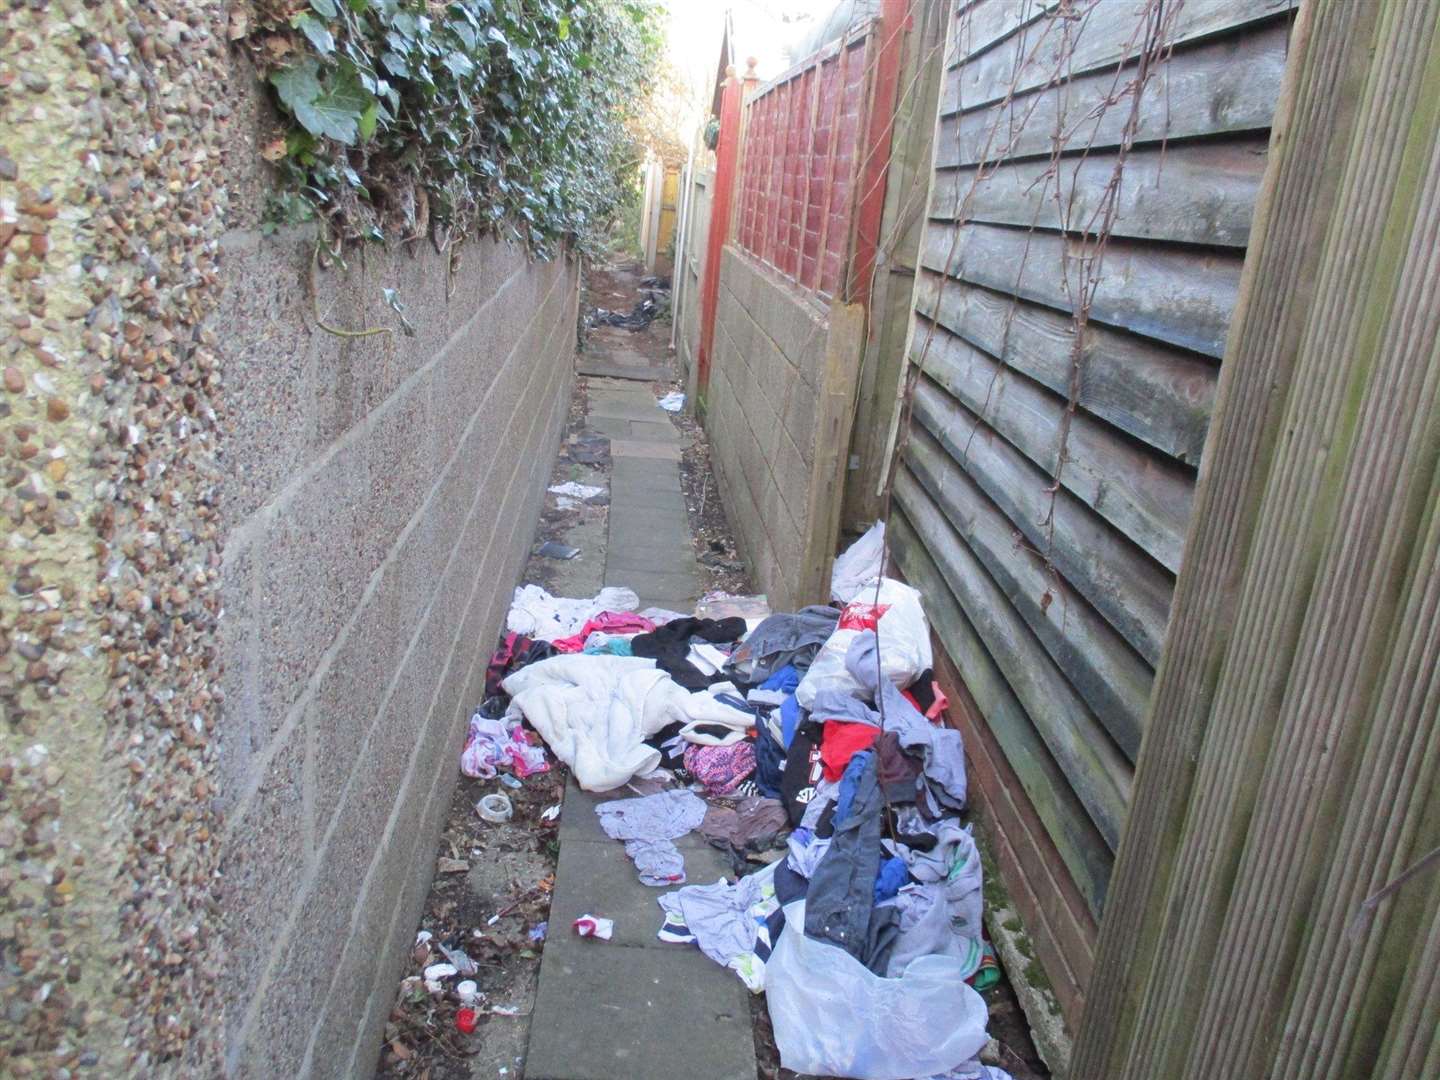 Fly tipping of chartiy bag donations in alleys behind houses in Thanet has become a problem which the council is trying to eradicate Picture: Thanet District Council (6819211)